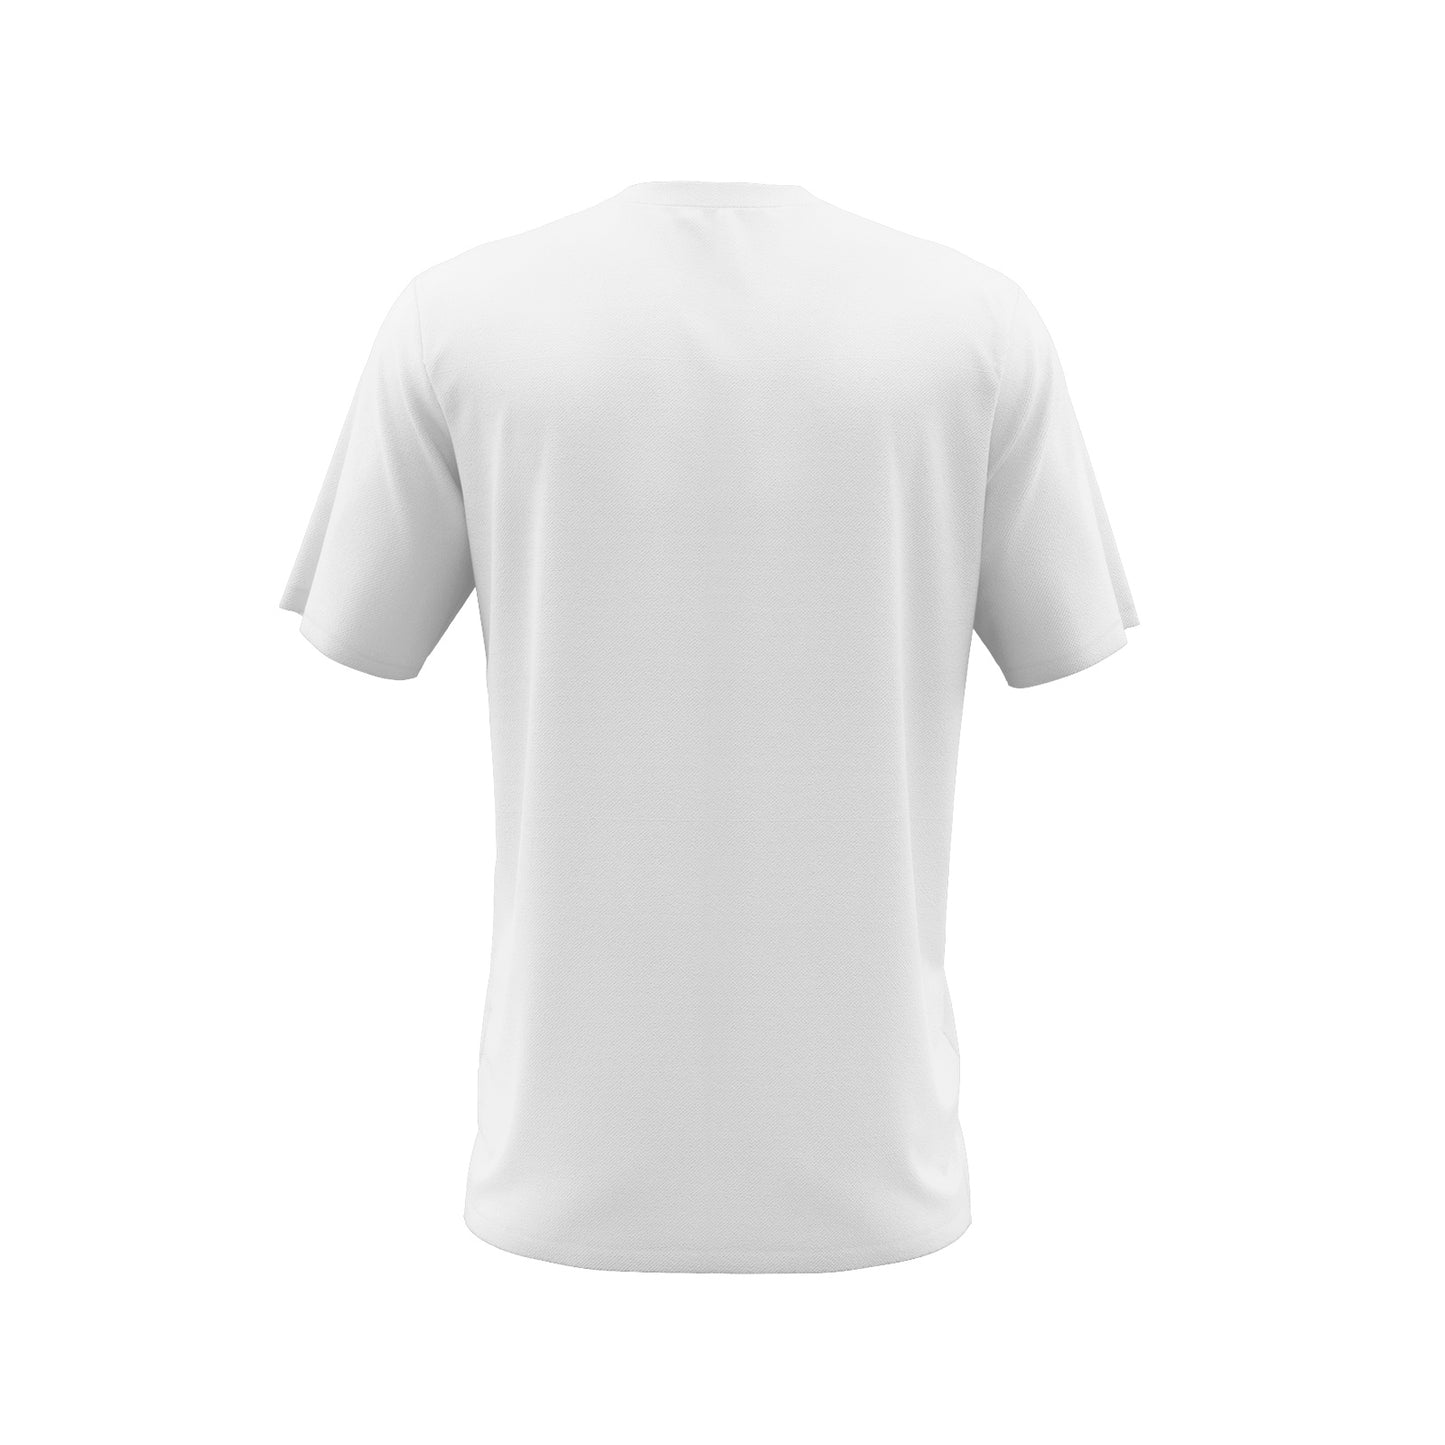 Knqv Fitness | Men's All-Over, High Quality Polyester and Spandex Blend T-shirt